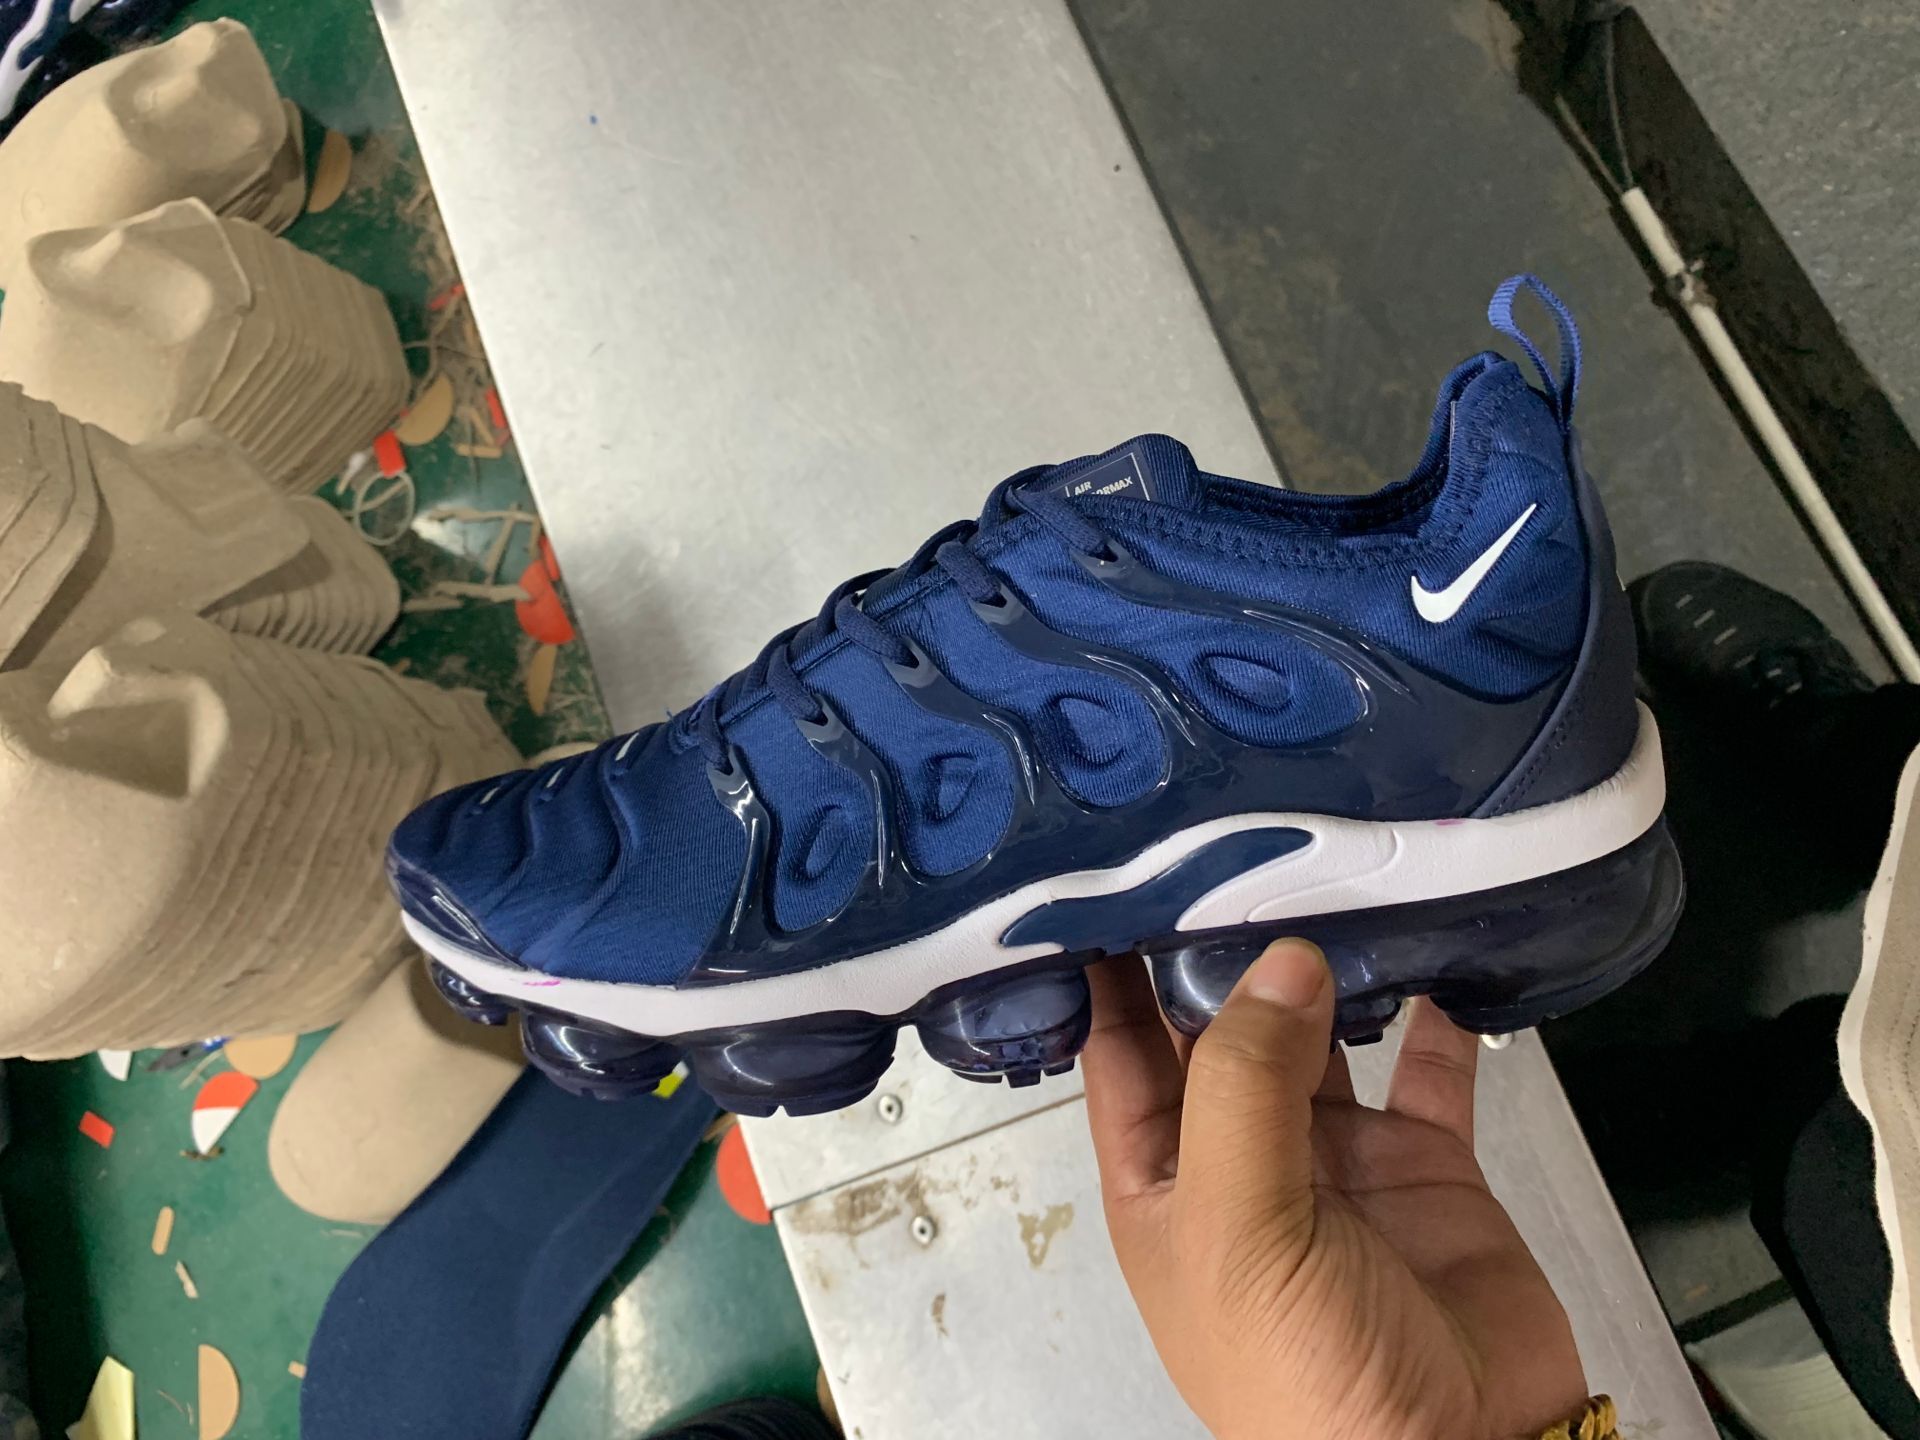 Men's Running weapon Nike Air Max TN Shoes 010